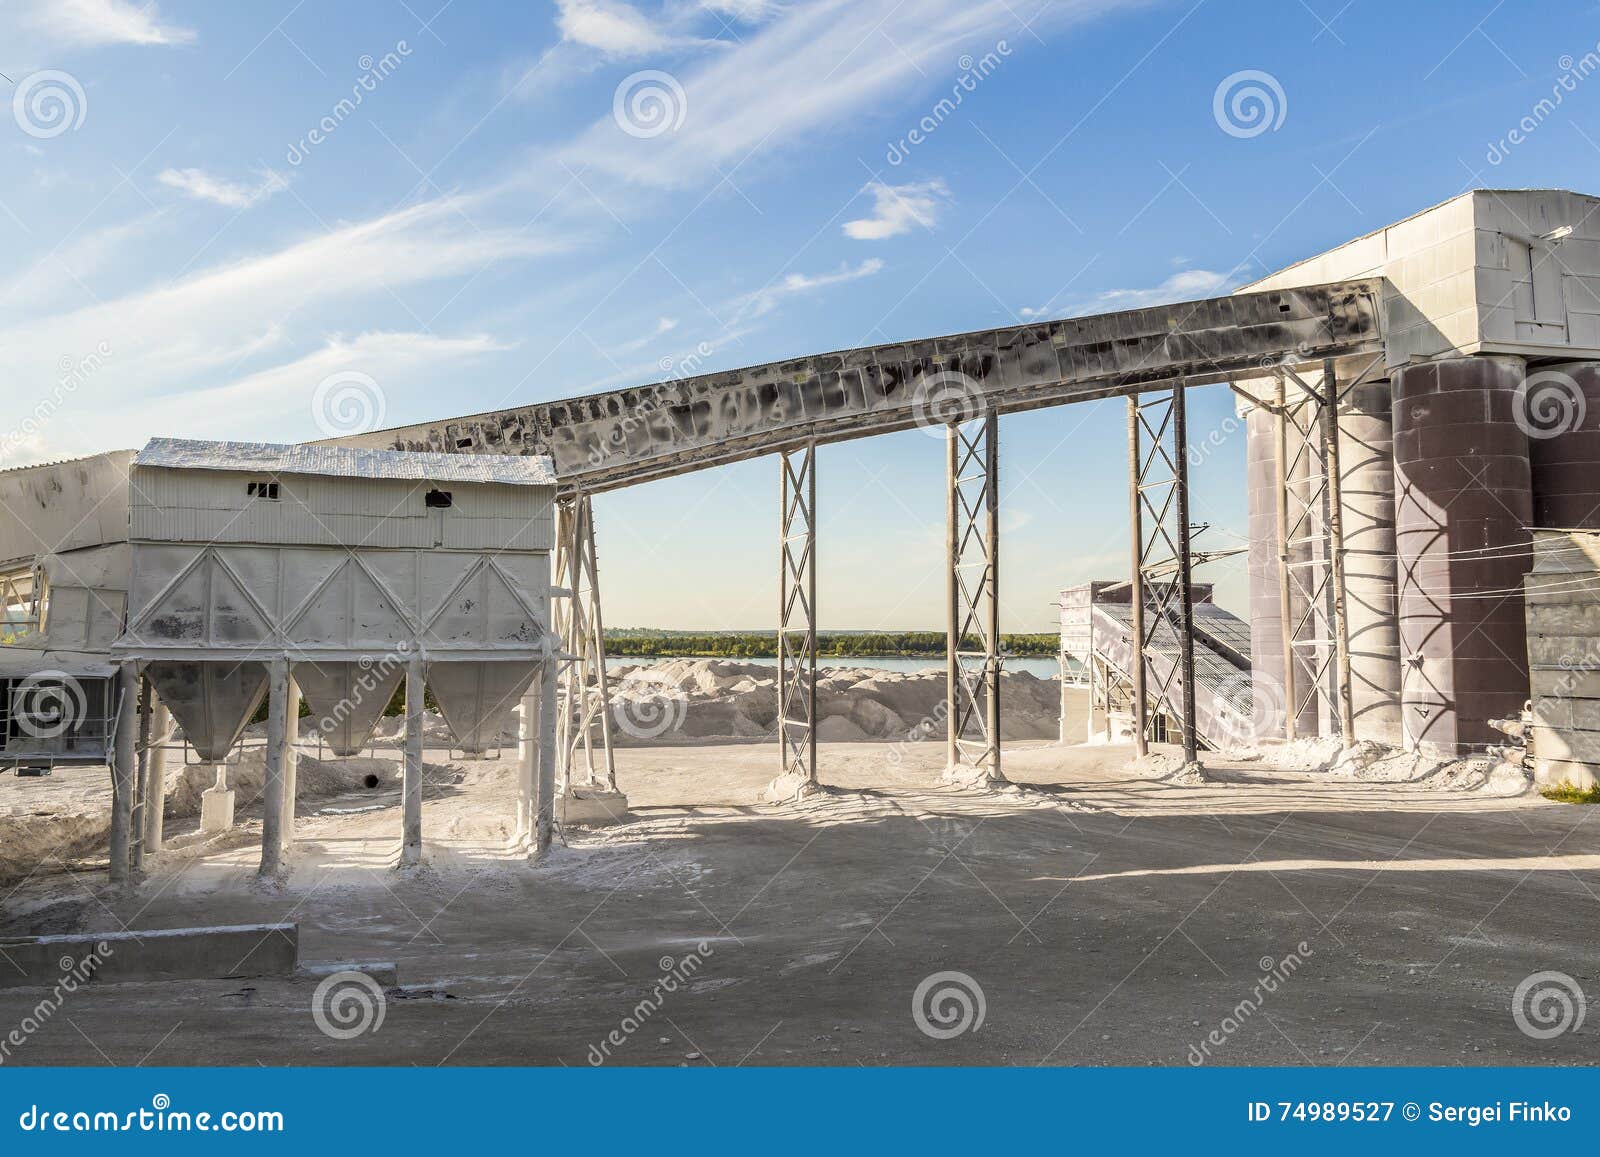 Part of a Small Cement Factory Stock Image - Image of heap, containers